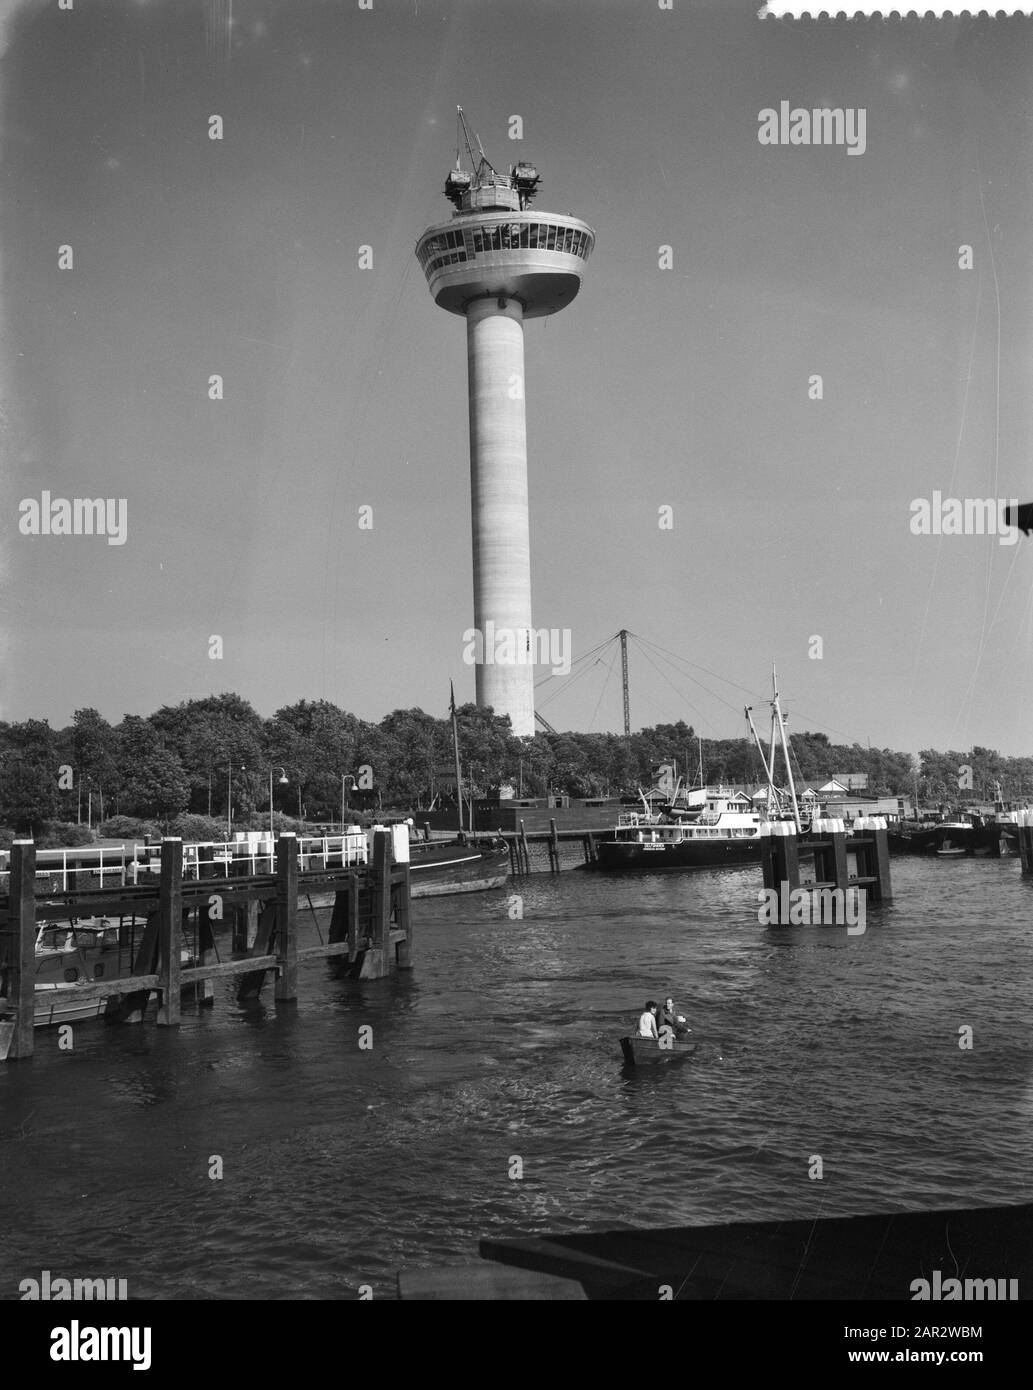 The Euromast  Hoisting the restaurant at the top of the Euromast Annotation: The Euromast (1958-1960) was designed by architect H.A. Maaskant on the occasion of the Floriade in Rotterdam in 1960. is the Euromast designated as National Monument Date: 11 July 1959 Location: Rotterdam, Zuid-Holland Keywords: construction Stock Photo